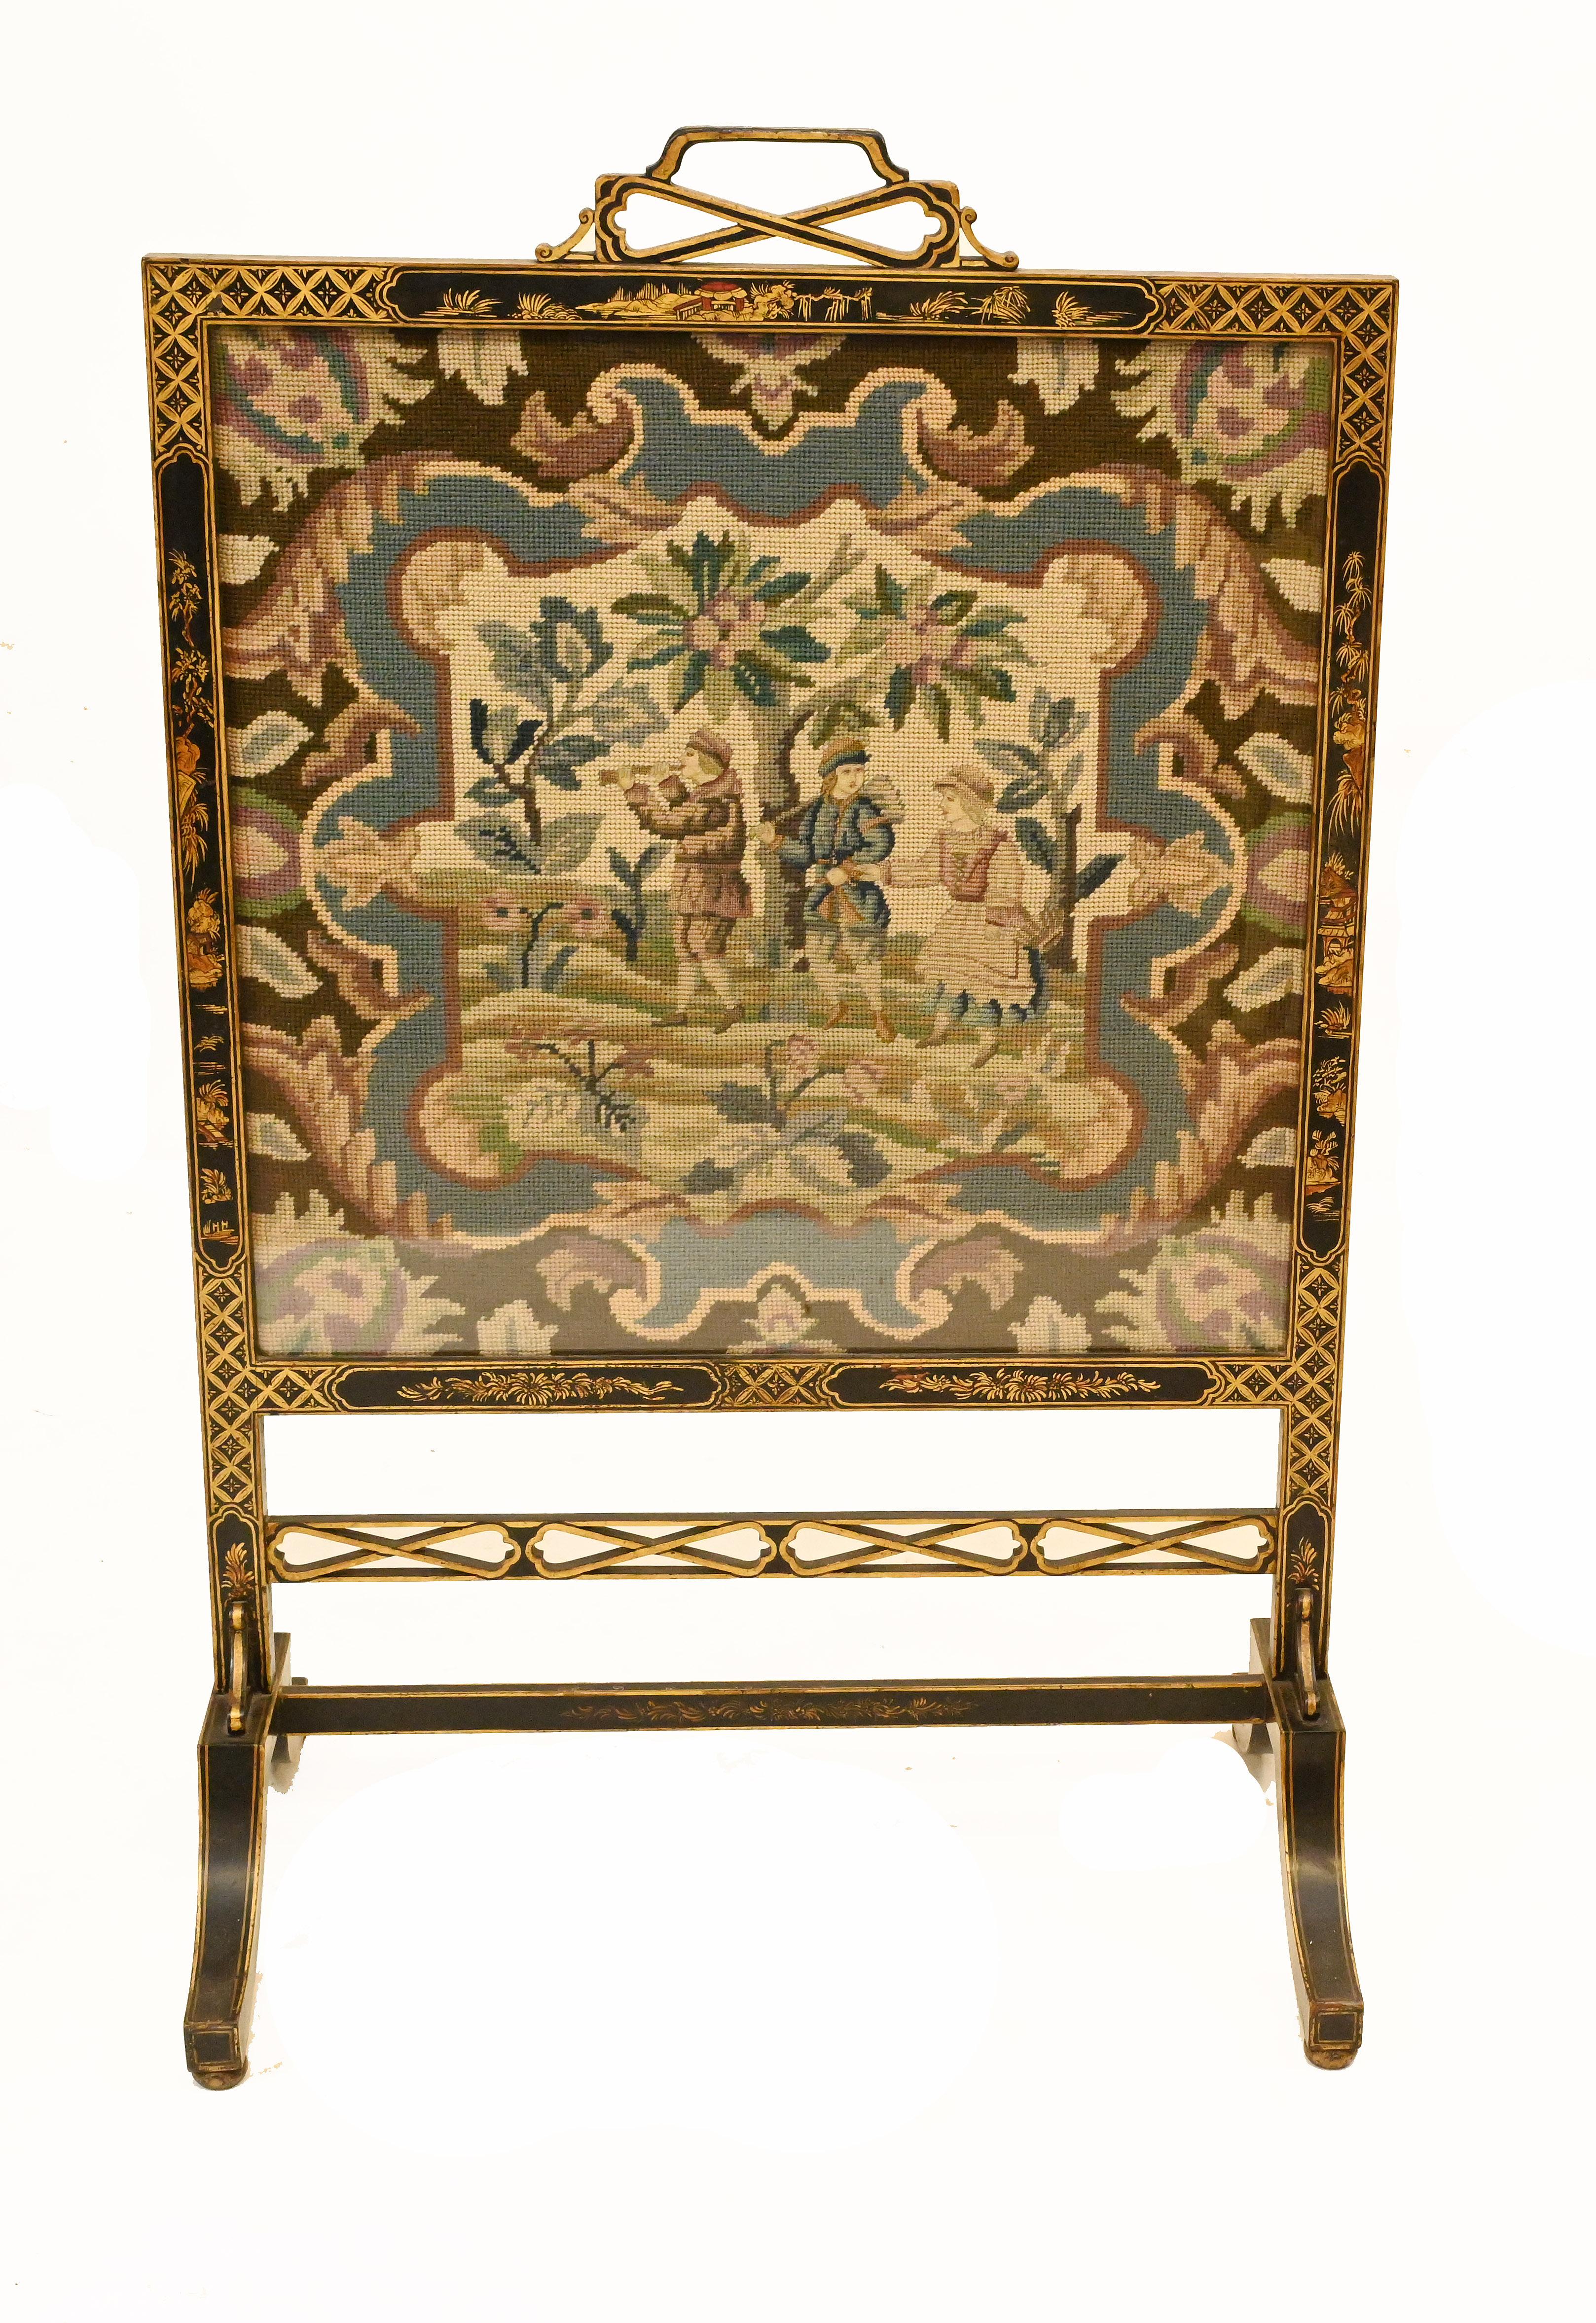 Quirky Regency lacquered screen housing a lovely tapestry
Lacquered frame features intricate hand painted Chinoiserie
Great decorative piece for the home, very collectable
The tapestry might be older and this piece was specially designed to house